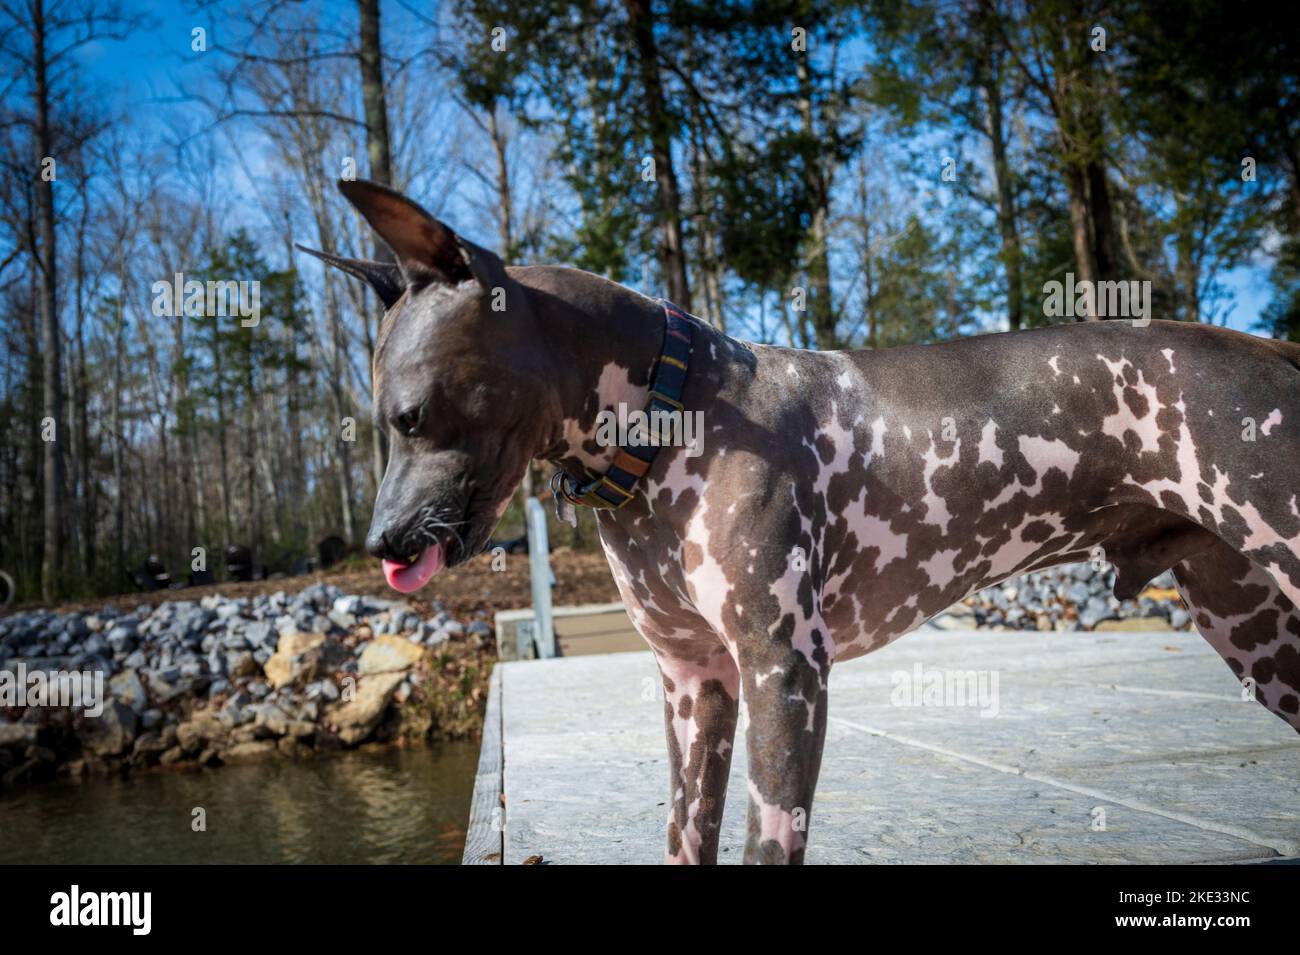 American Hairless Dog walking on a fishing deck in the Tennessee River. Taken in a cloudy day during the month of November Stock Photo